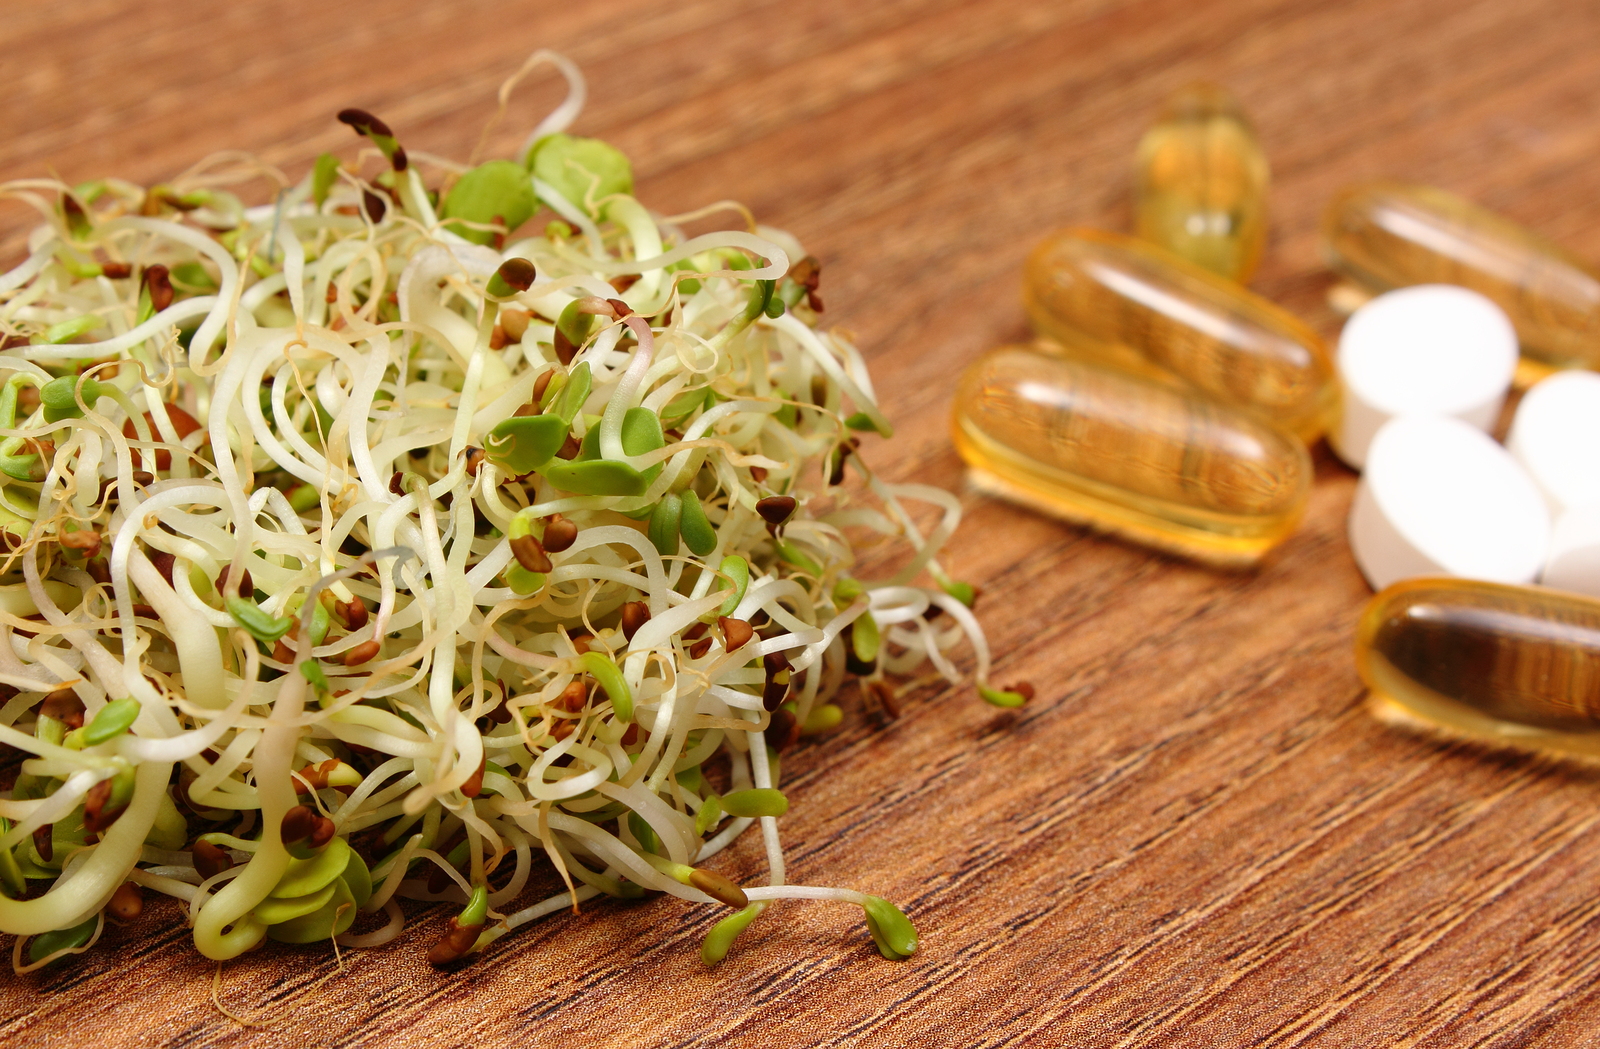 Alfalfa and radish sprouts with tablets supplements on wooden surface, choice between healthy eating and pills, healthy lifestyle food and nutrition